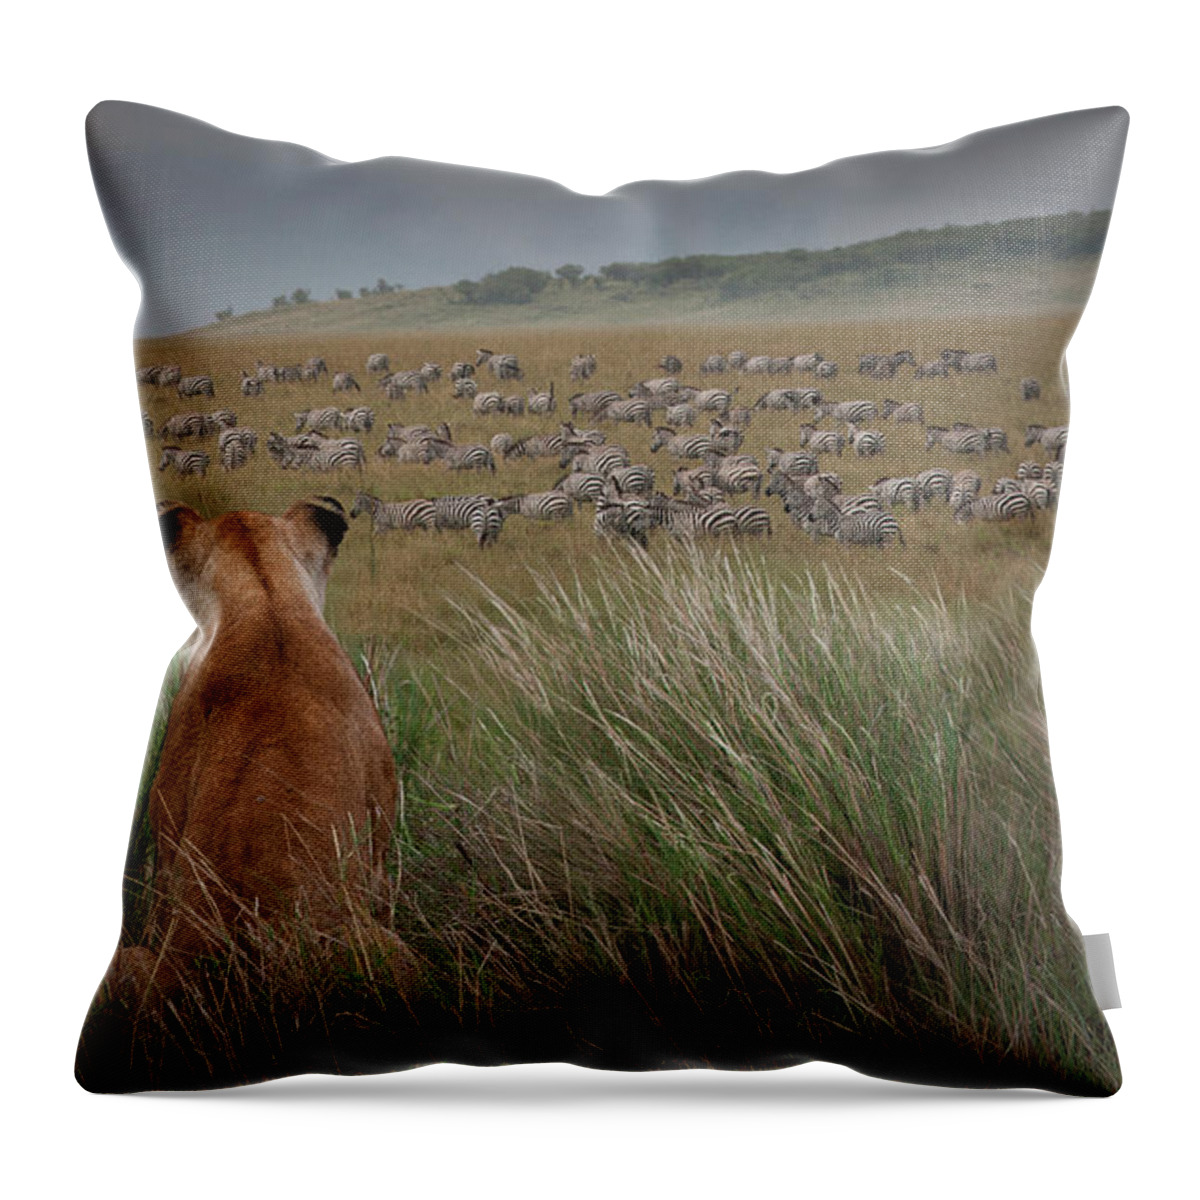 Kenya Throw Pillow featuring the photograph Lioness Panthera Leo Watching Zebras by Buena Vista Images